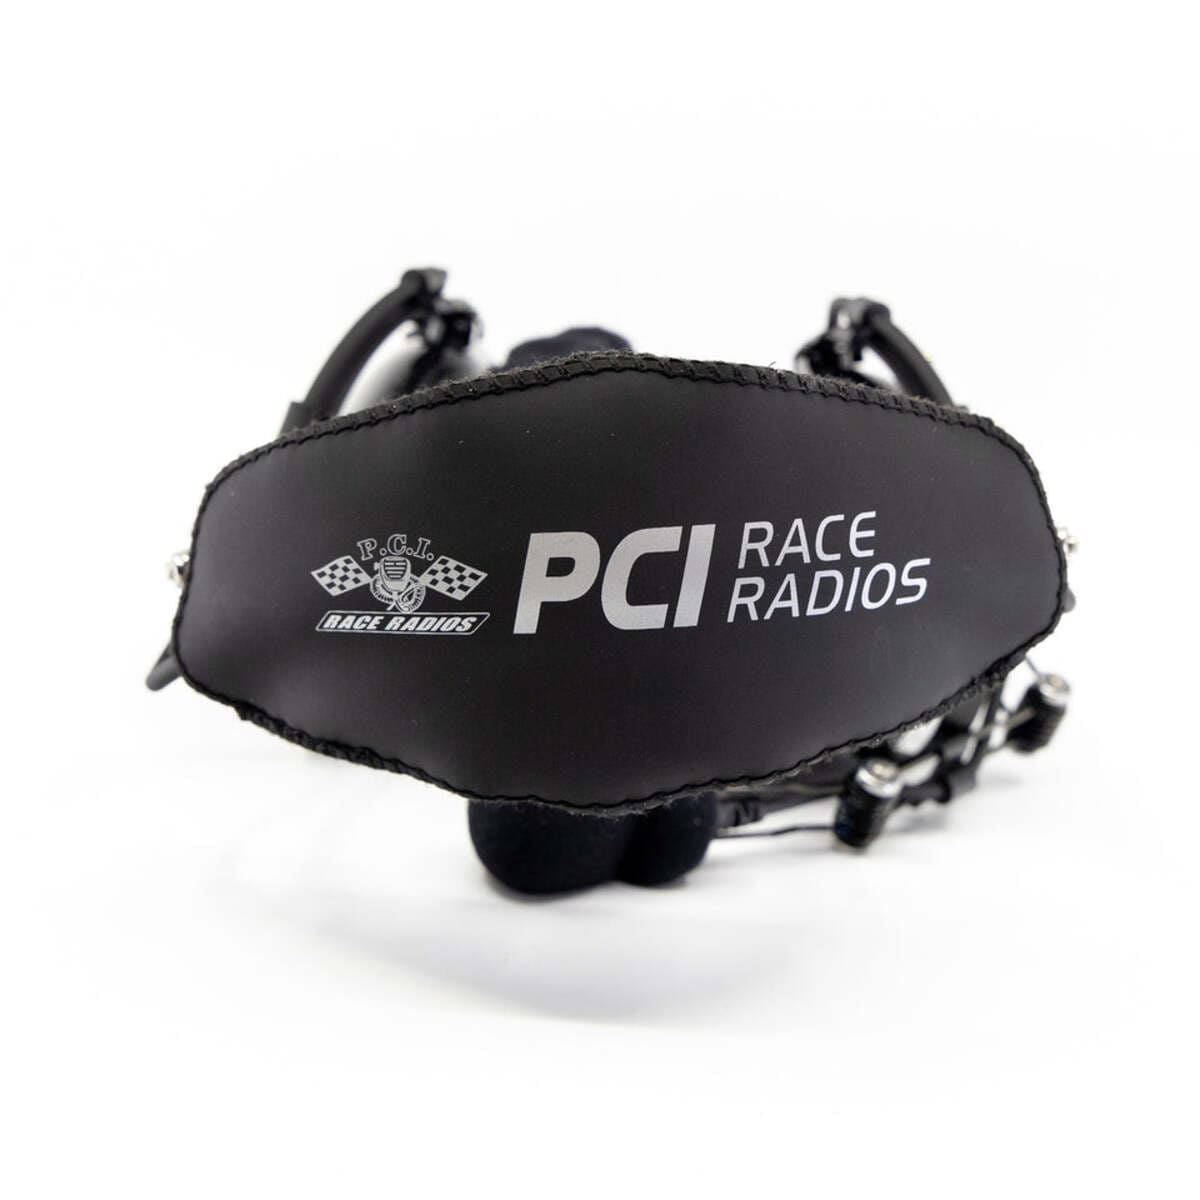 PCI Race Radios Trax G2 Stereo Headset With Volume Control